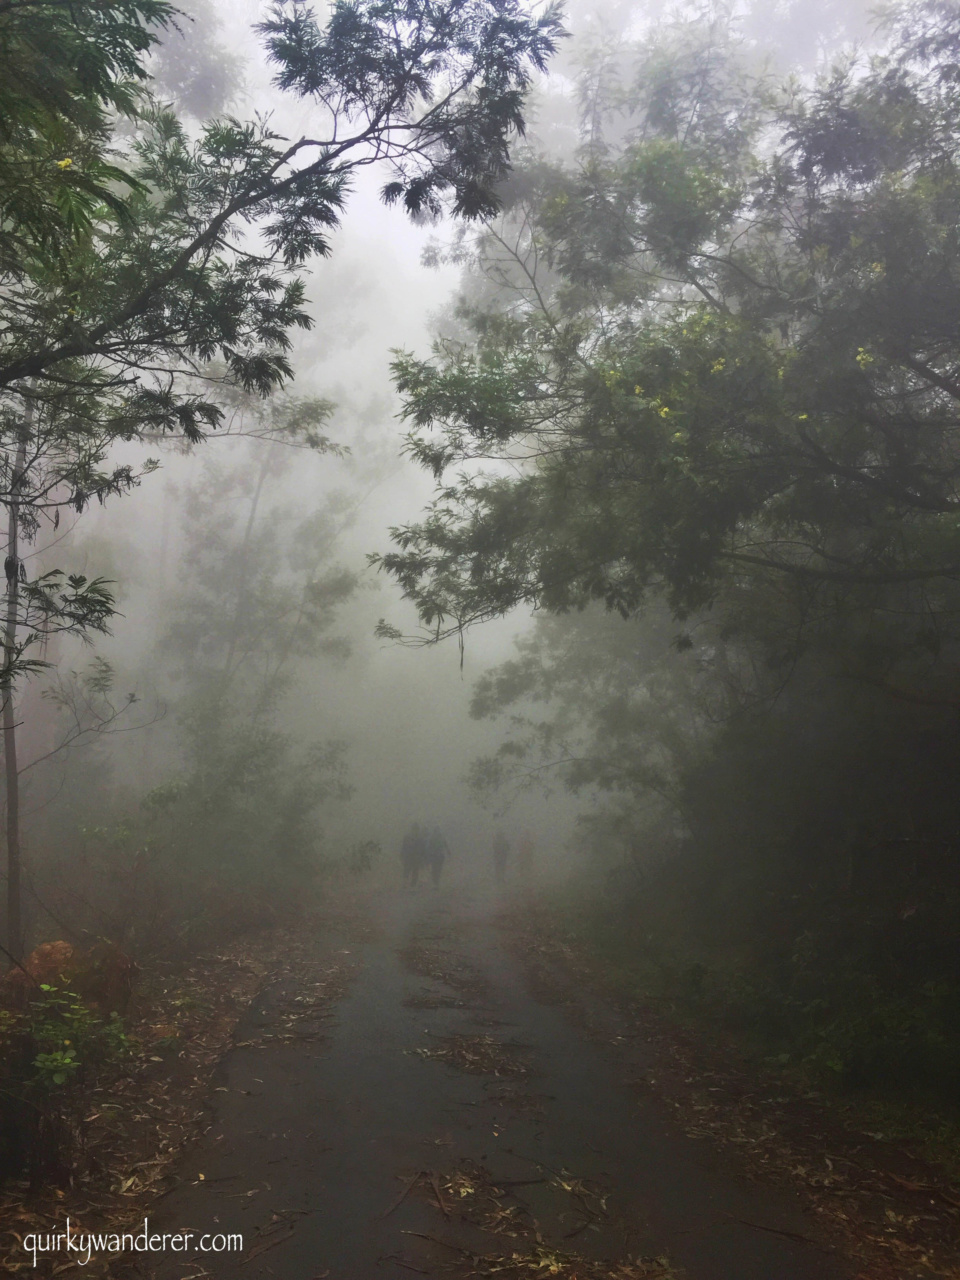 Kodaikanal is a famous hill station in Southern India. Here is a list of experiences you can have in the forests of Kodaikanal beyond the touristy hotspots.